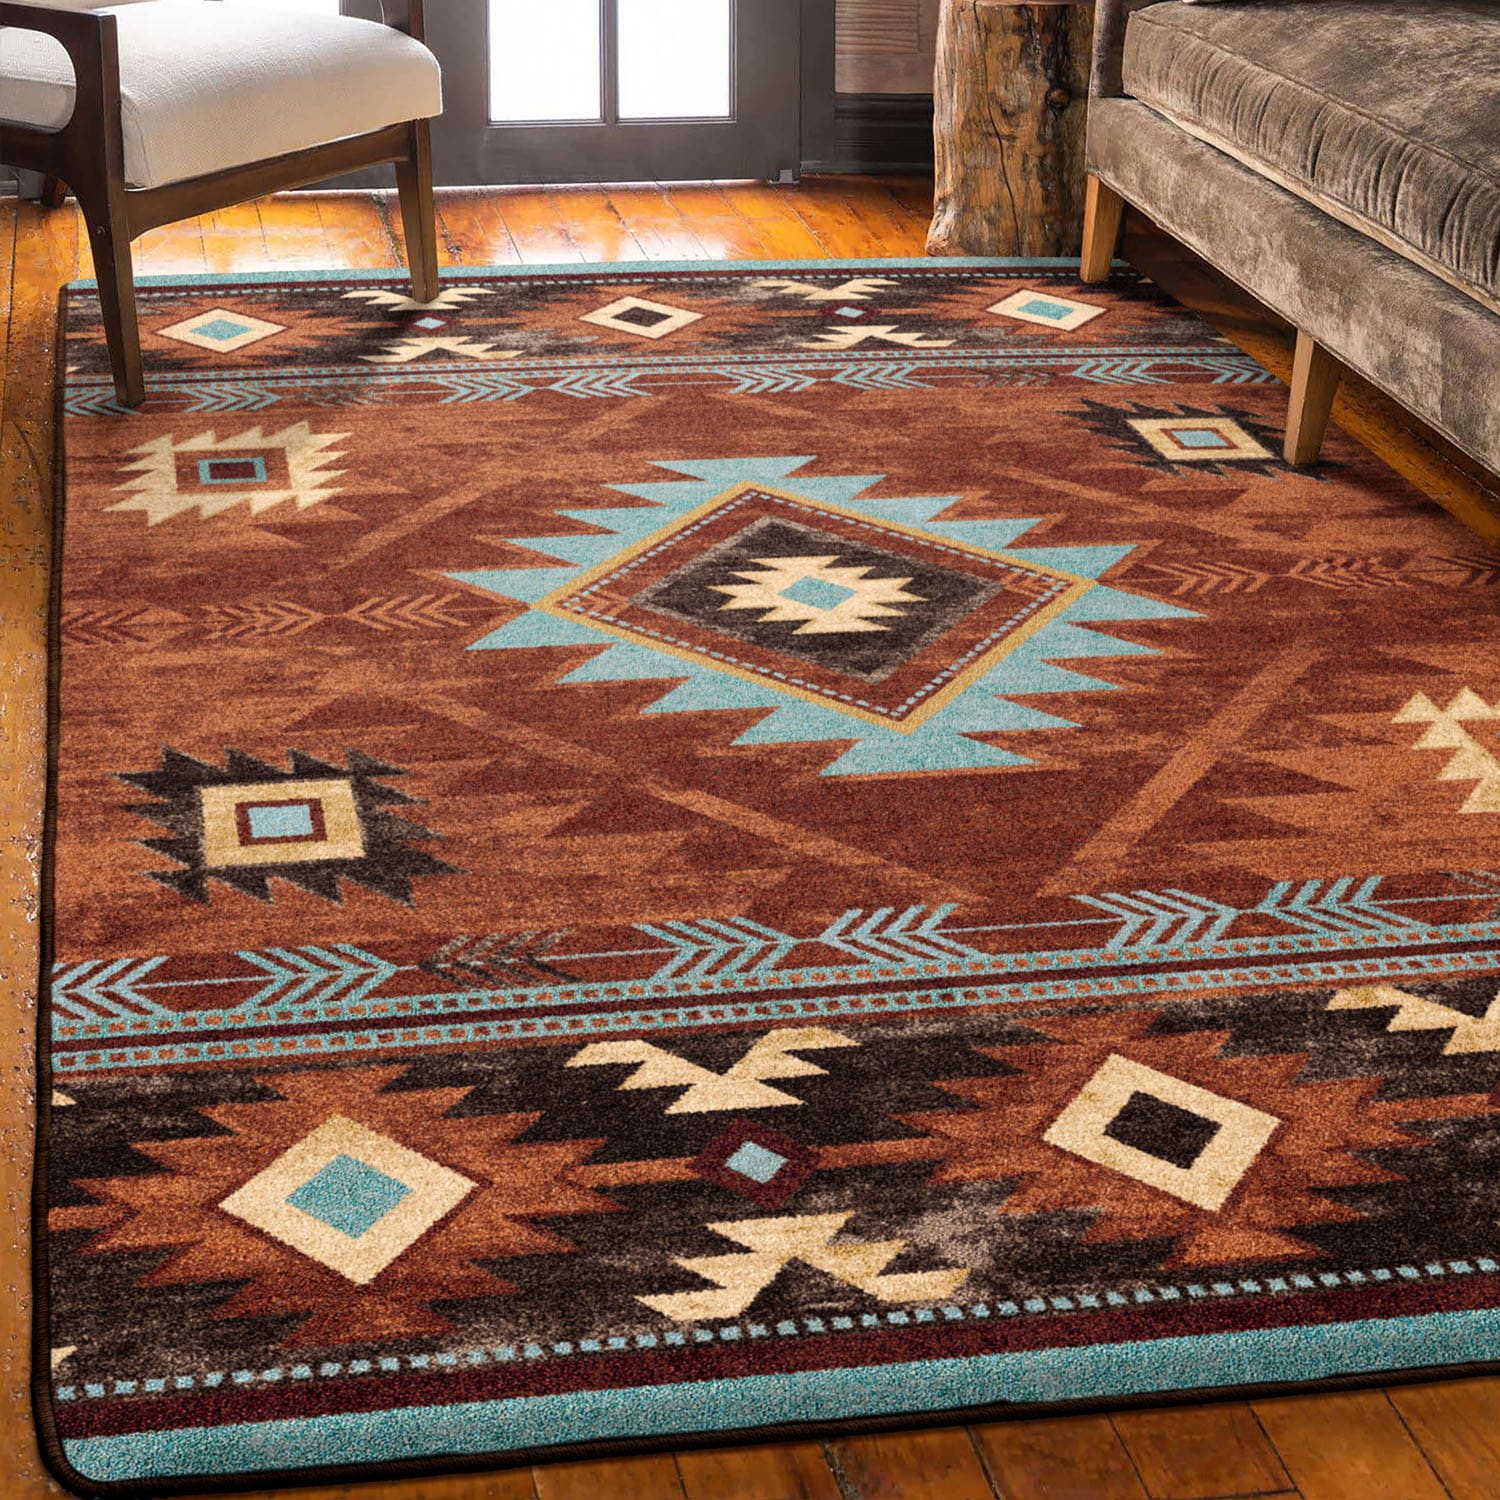 Western Bedding Shopping Guide: What to Look For and Where to Buy -  Southwestern Rugs Depot